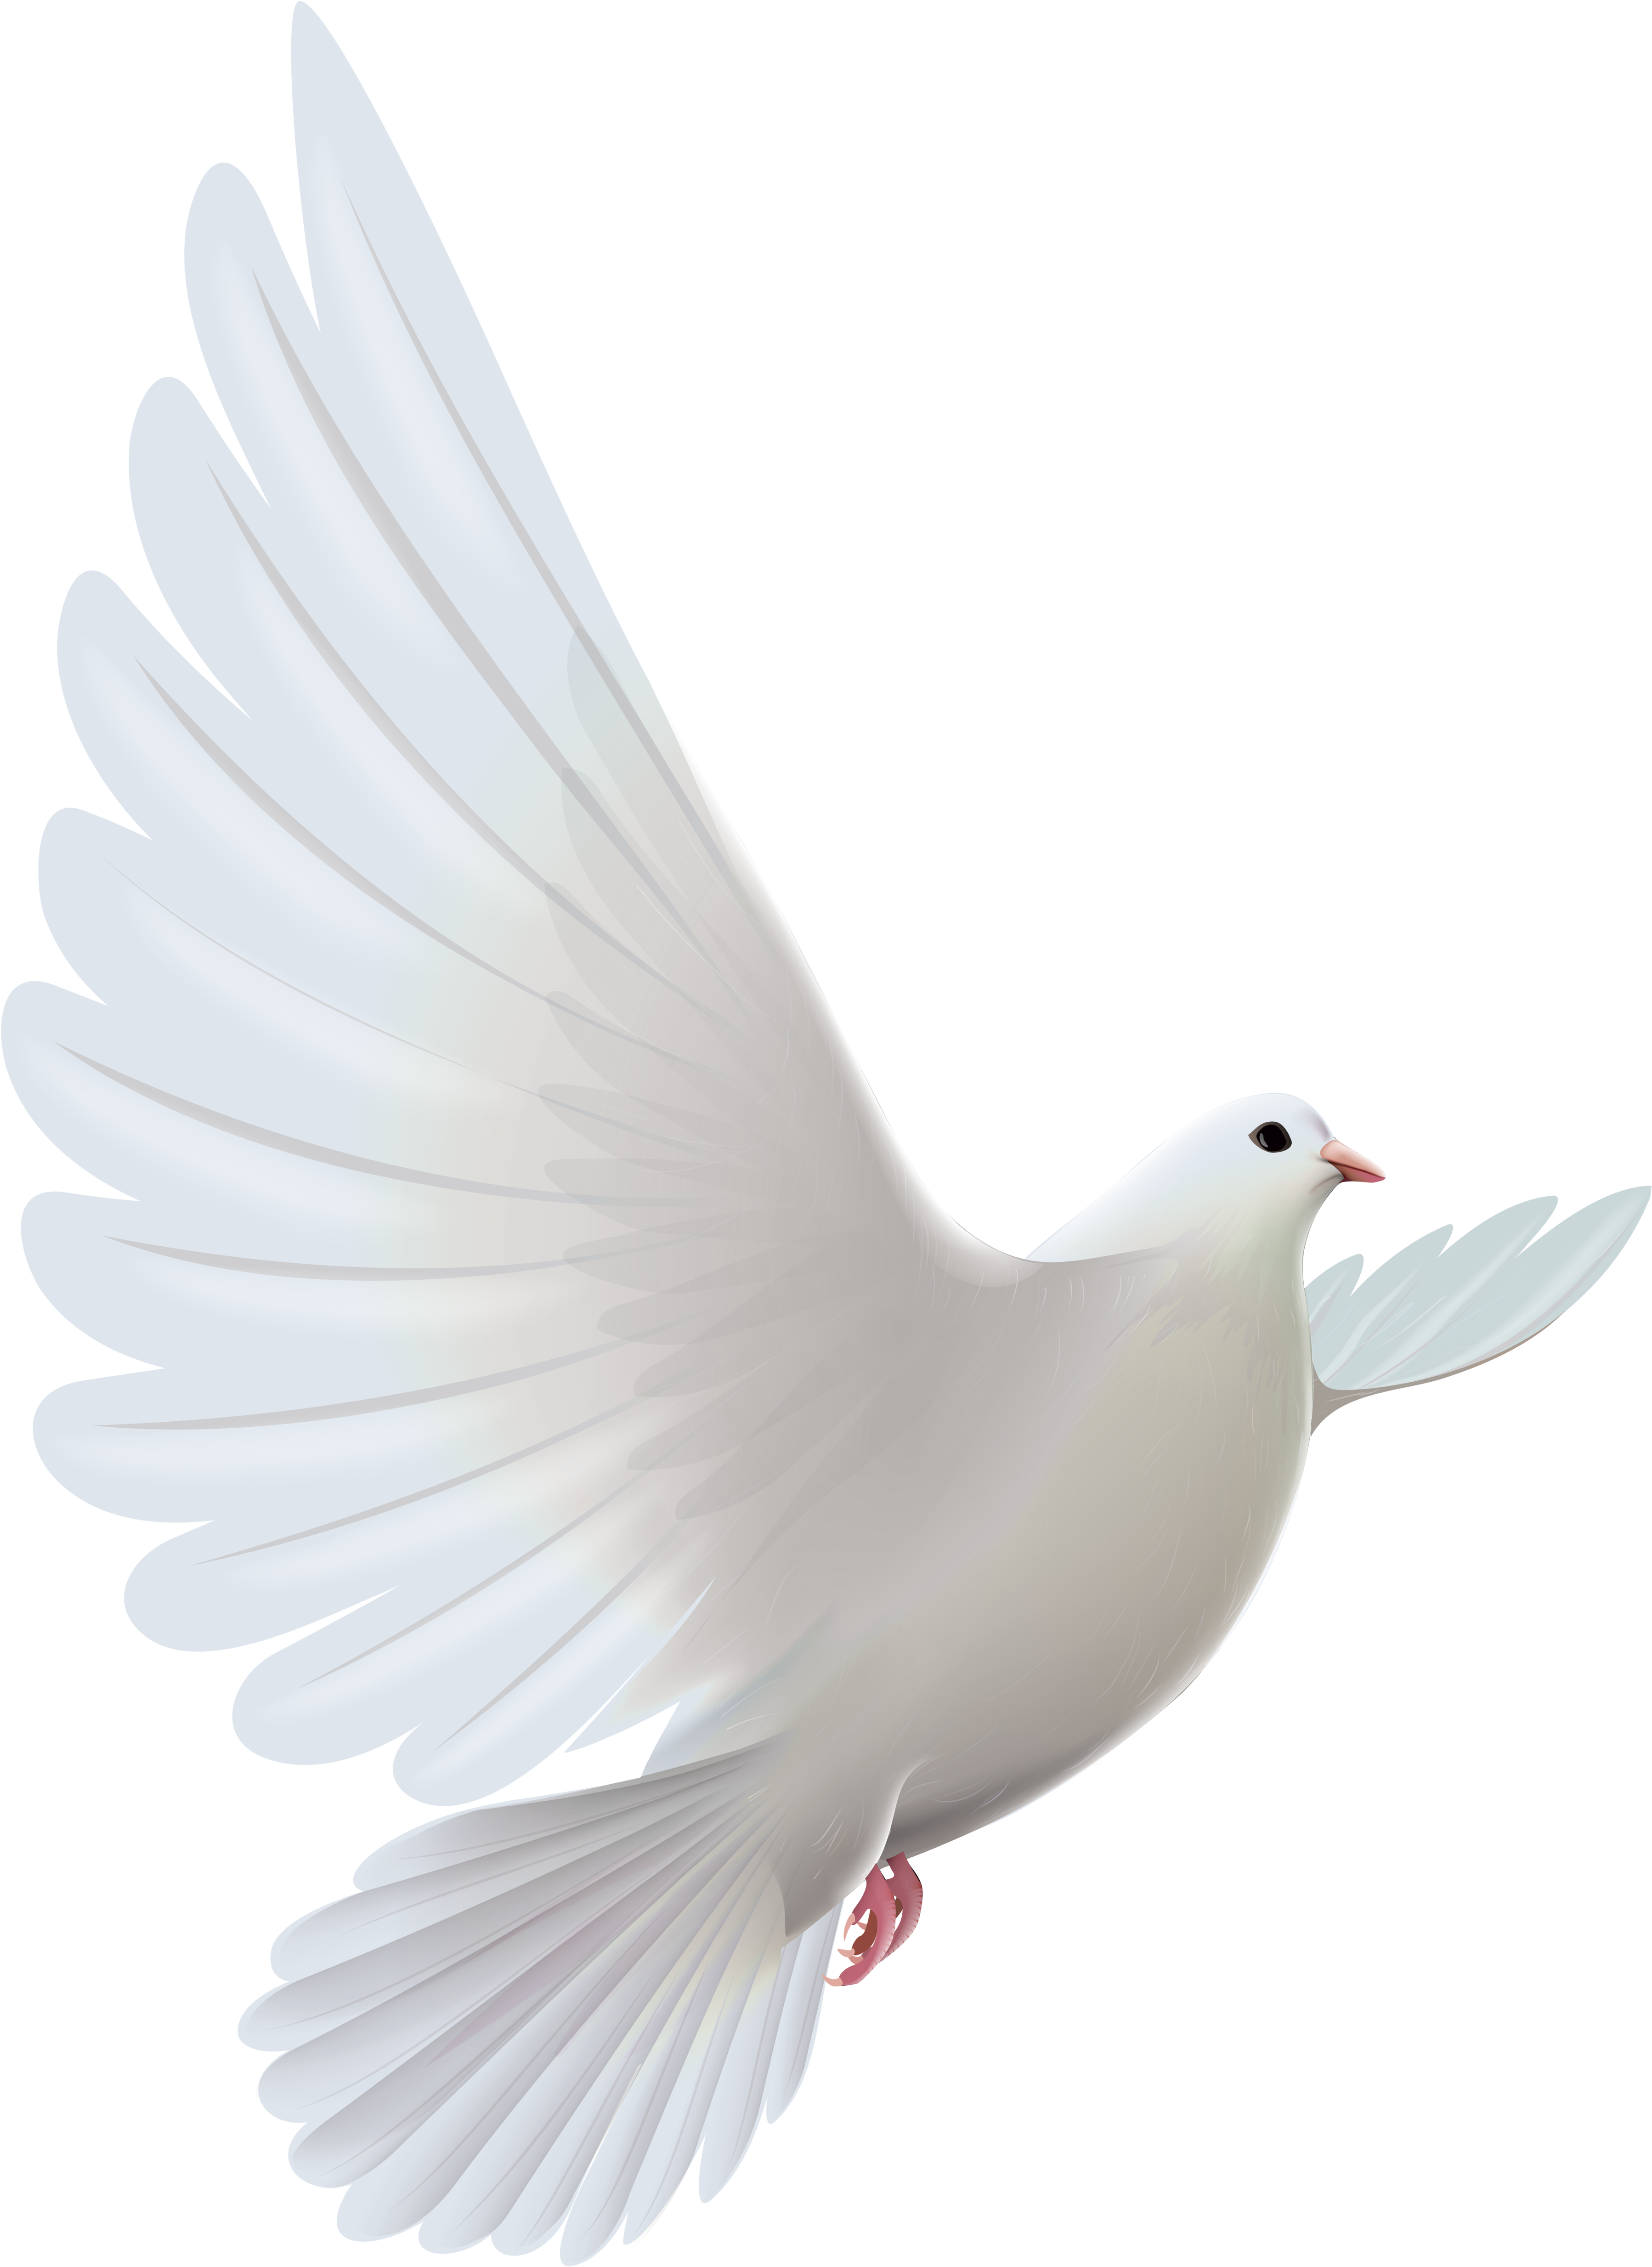 White Dove Transparent Png Clipartu200b Gallery Yopriceville - White Pigeon Flying Png (3904x5175)